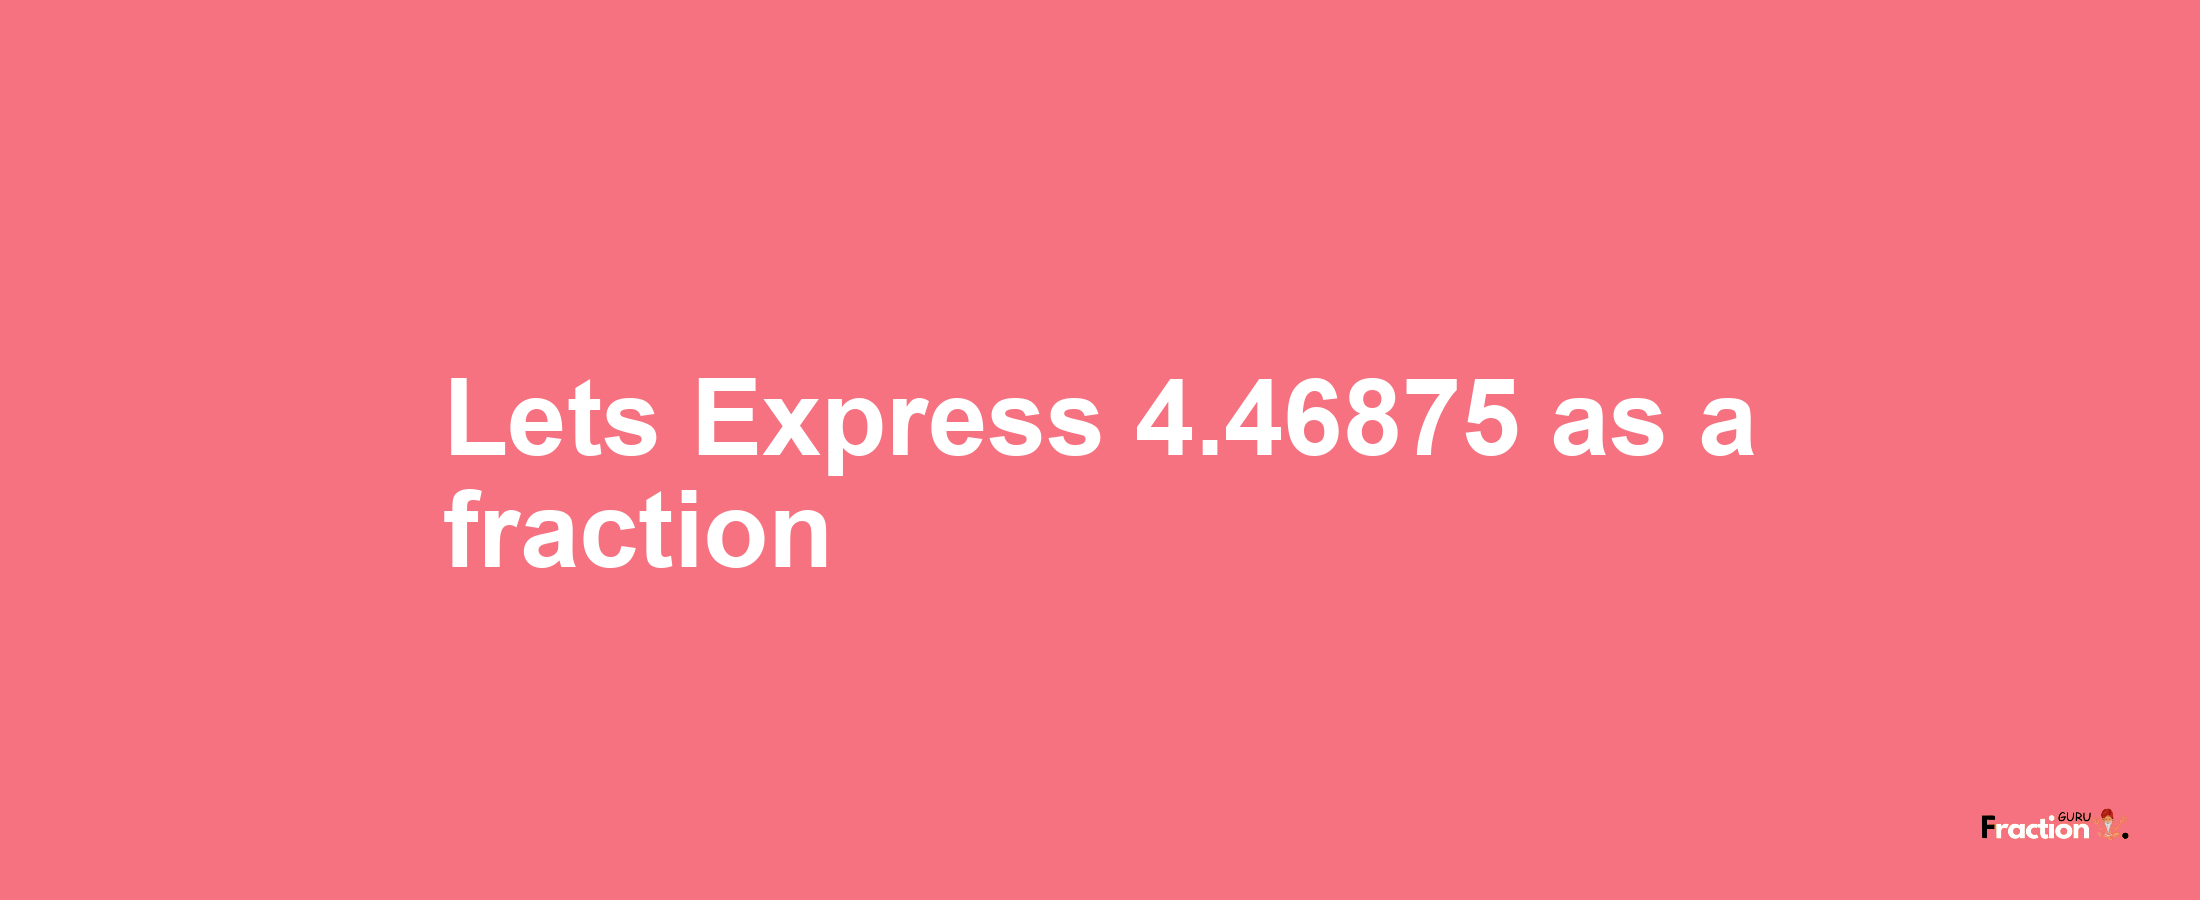 Lets Express 4.46875 as afraction